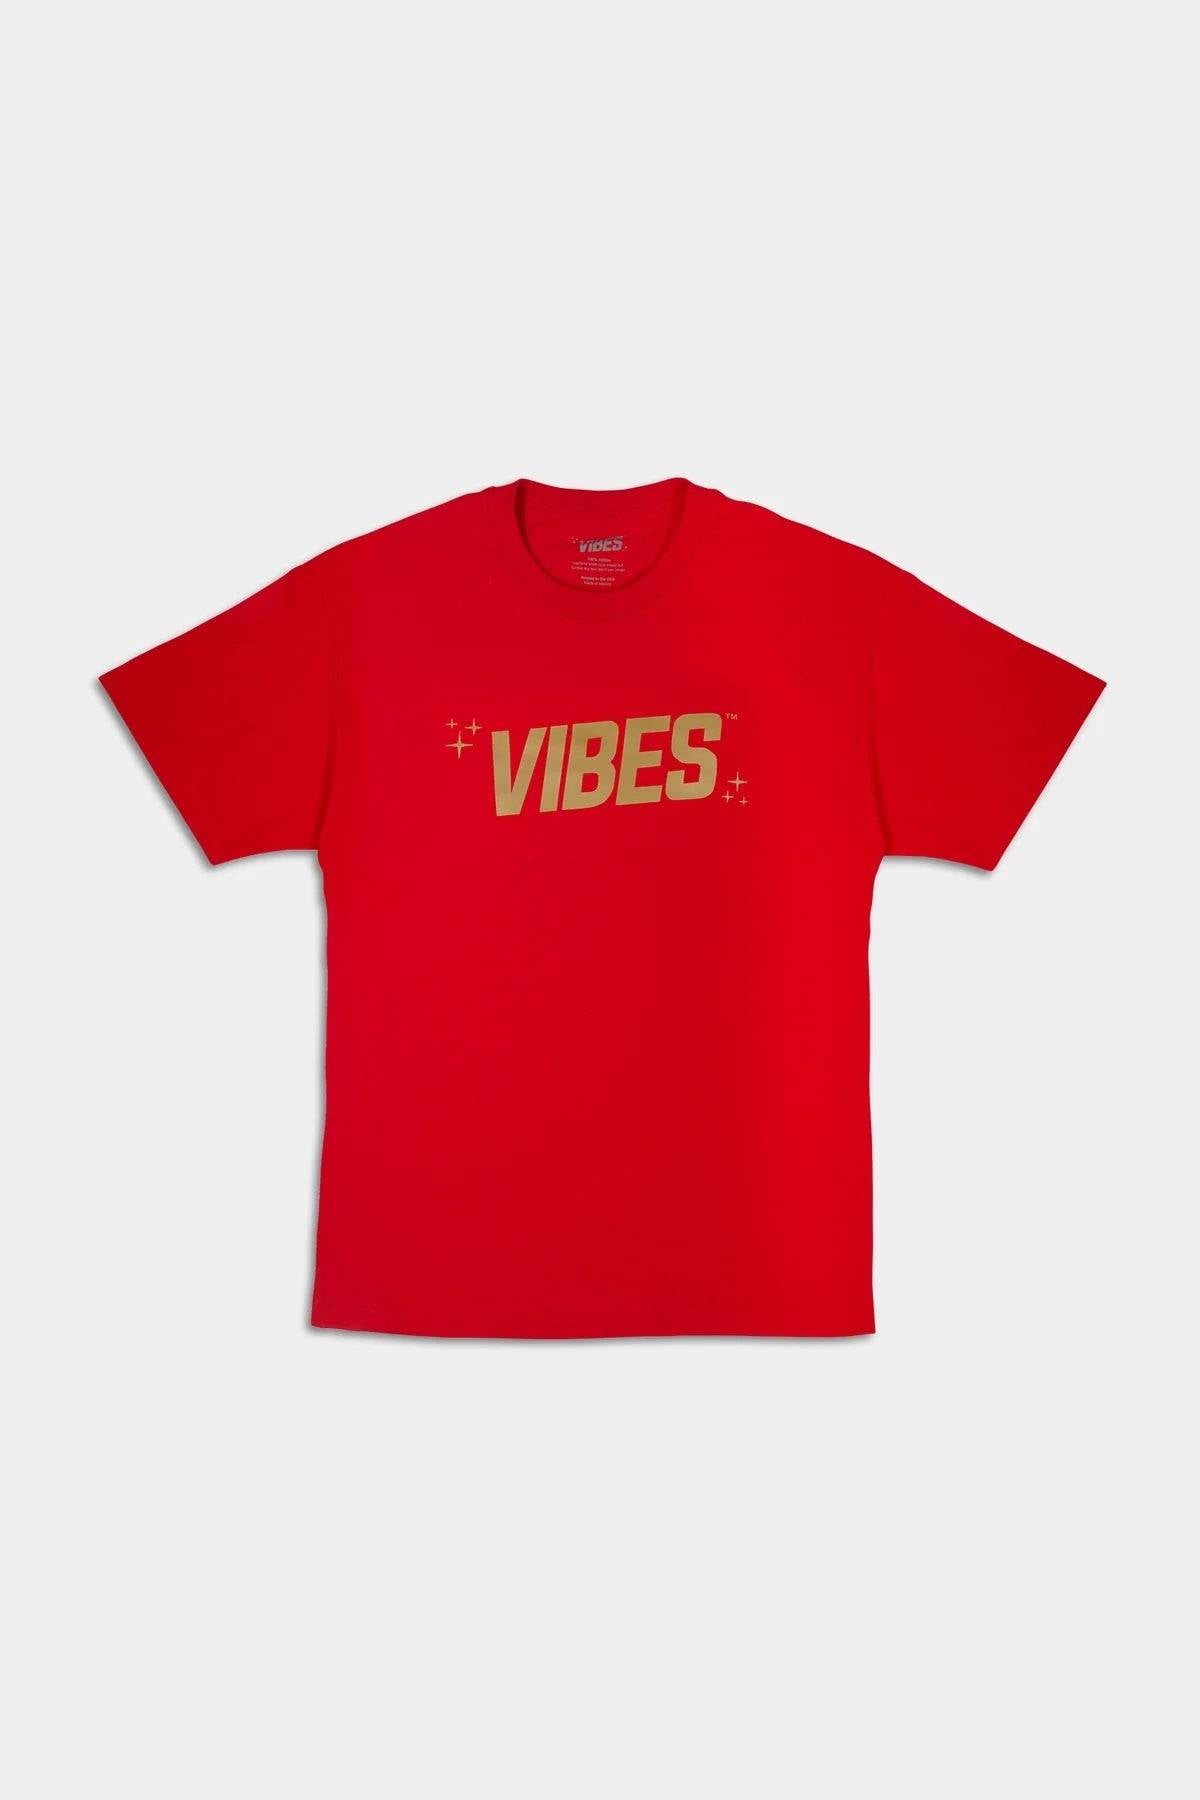 VIBES Red With Gold Logo T-Shirt X-Large